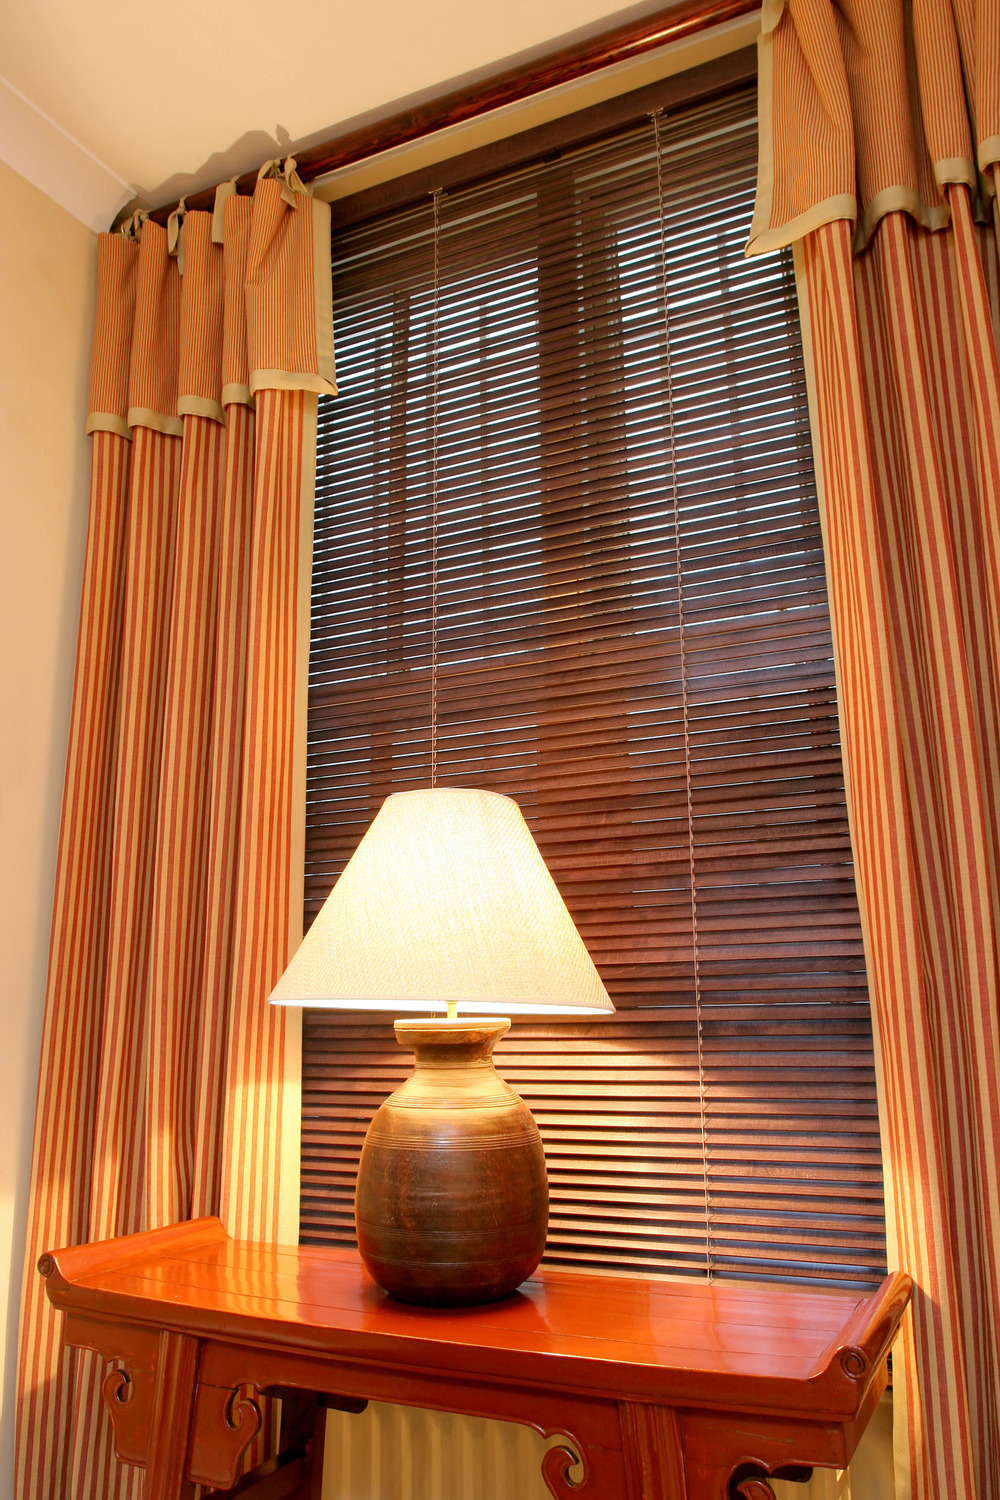 Curtains with valances attached 5